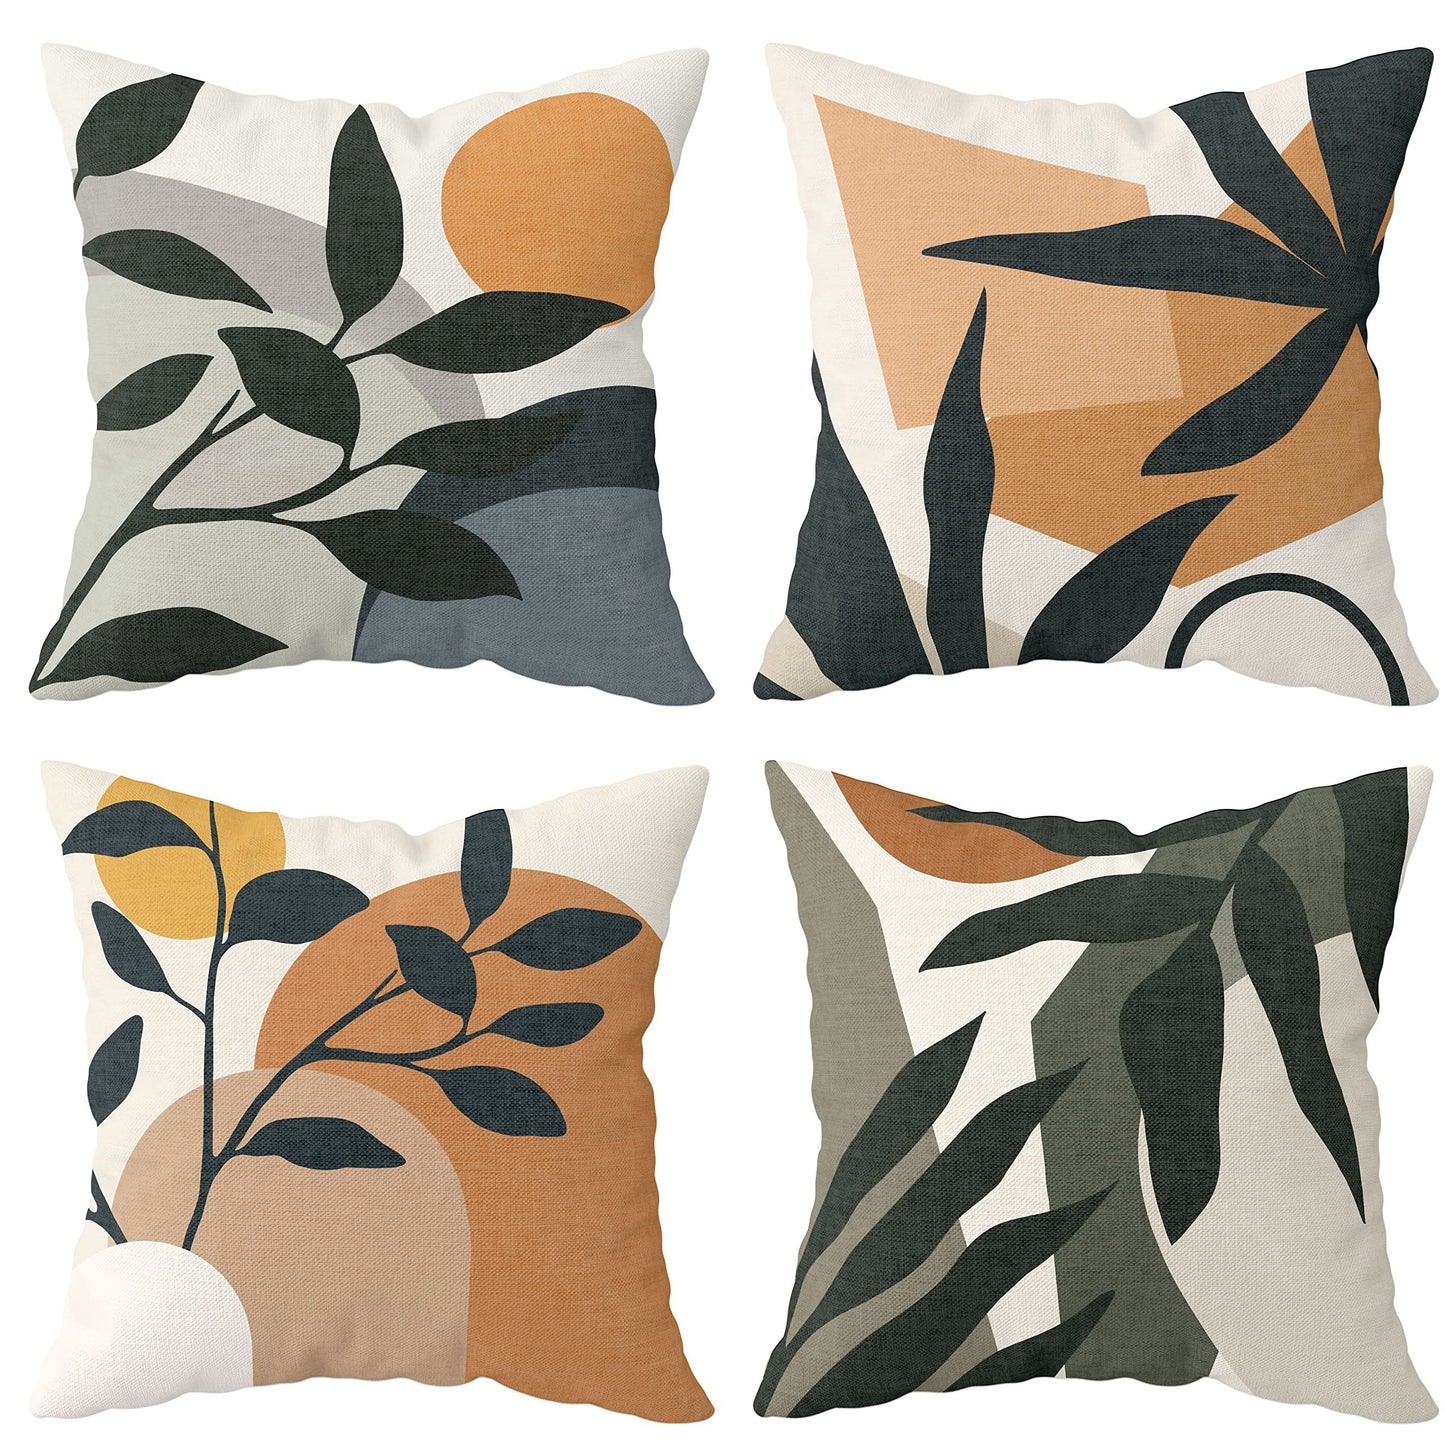 Throw Pillow Covers 20 x 20 Set of 4 Sun Sunset Sunrise Plant Bohemian Decorative Pillowcase Landscape Nature Minimalist Modern Art Aesthetic Couch Cushion Cover for Outdoor Home Decor, No insert